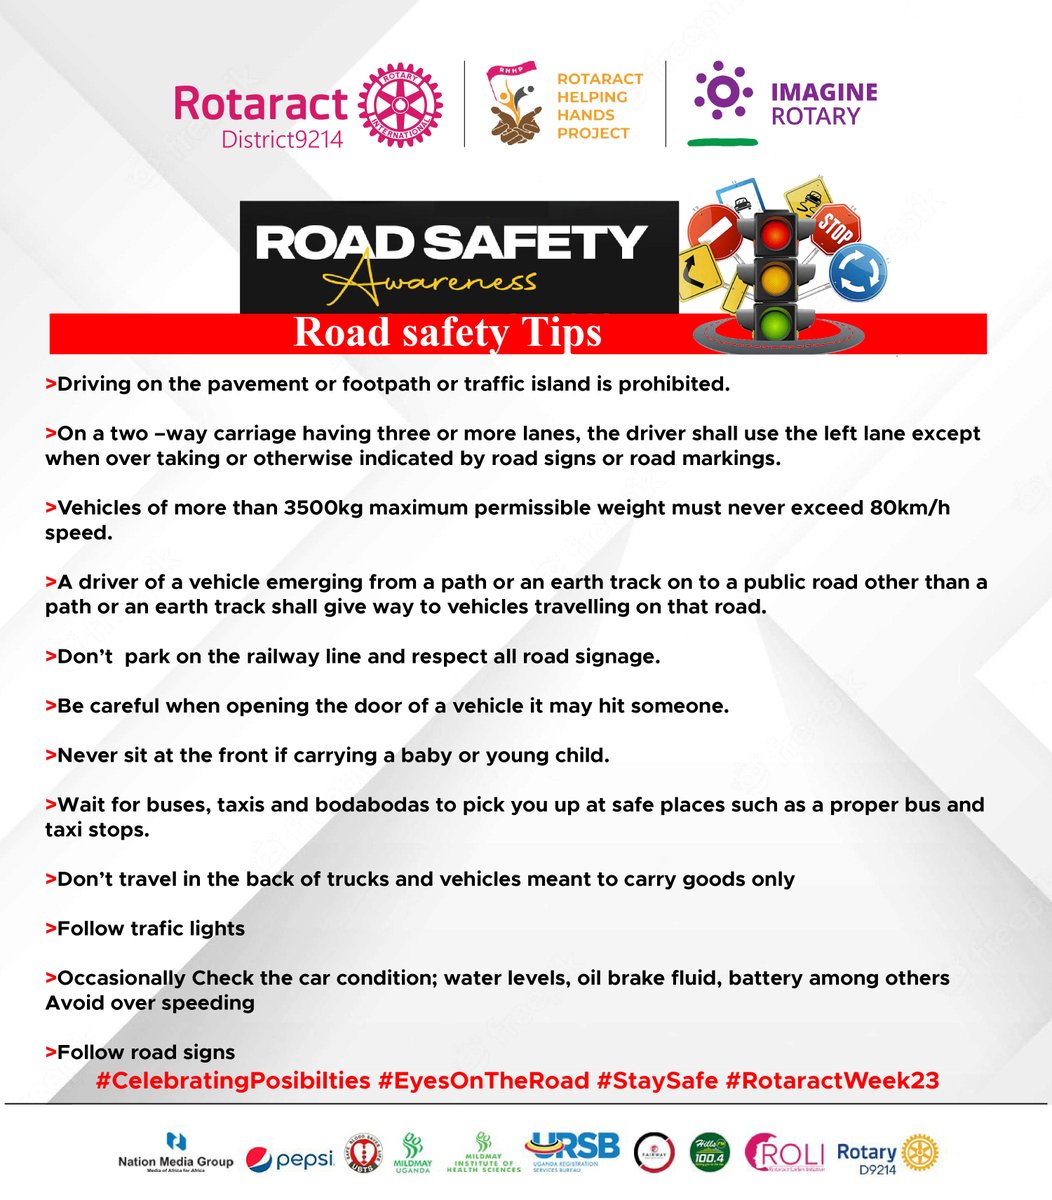 As we continue with the celebrations we ought to be watch full of our safety especially on the roads

#CelebratingPosibilities
#EyesOnTheRoad
#StaySafe 
#RotaractWeek23 #WorldRotaractWeek